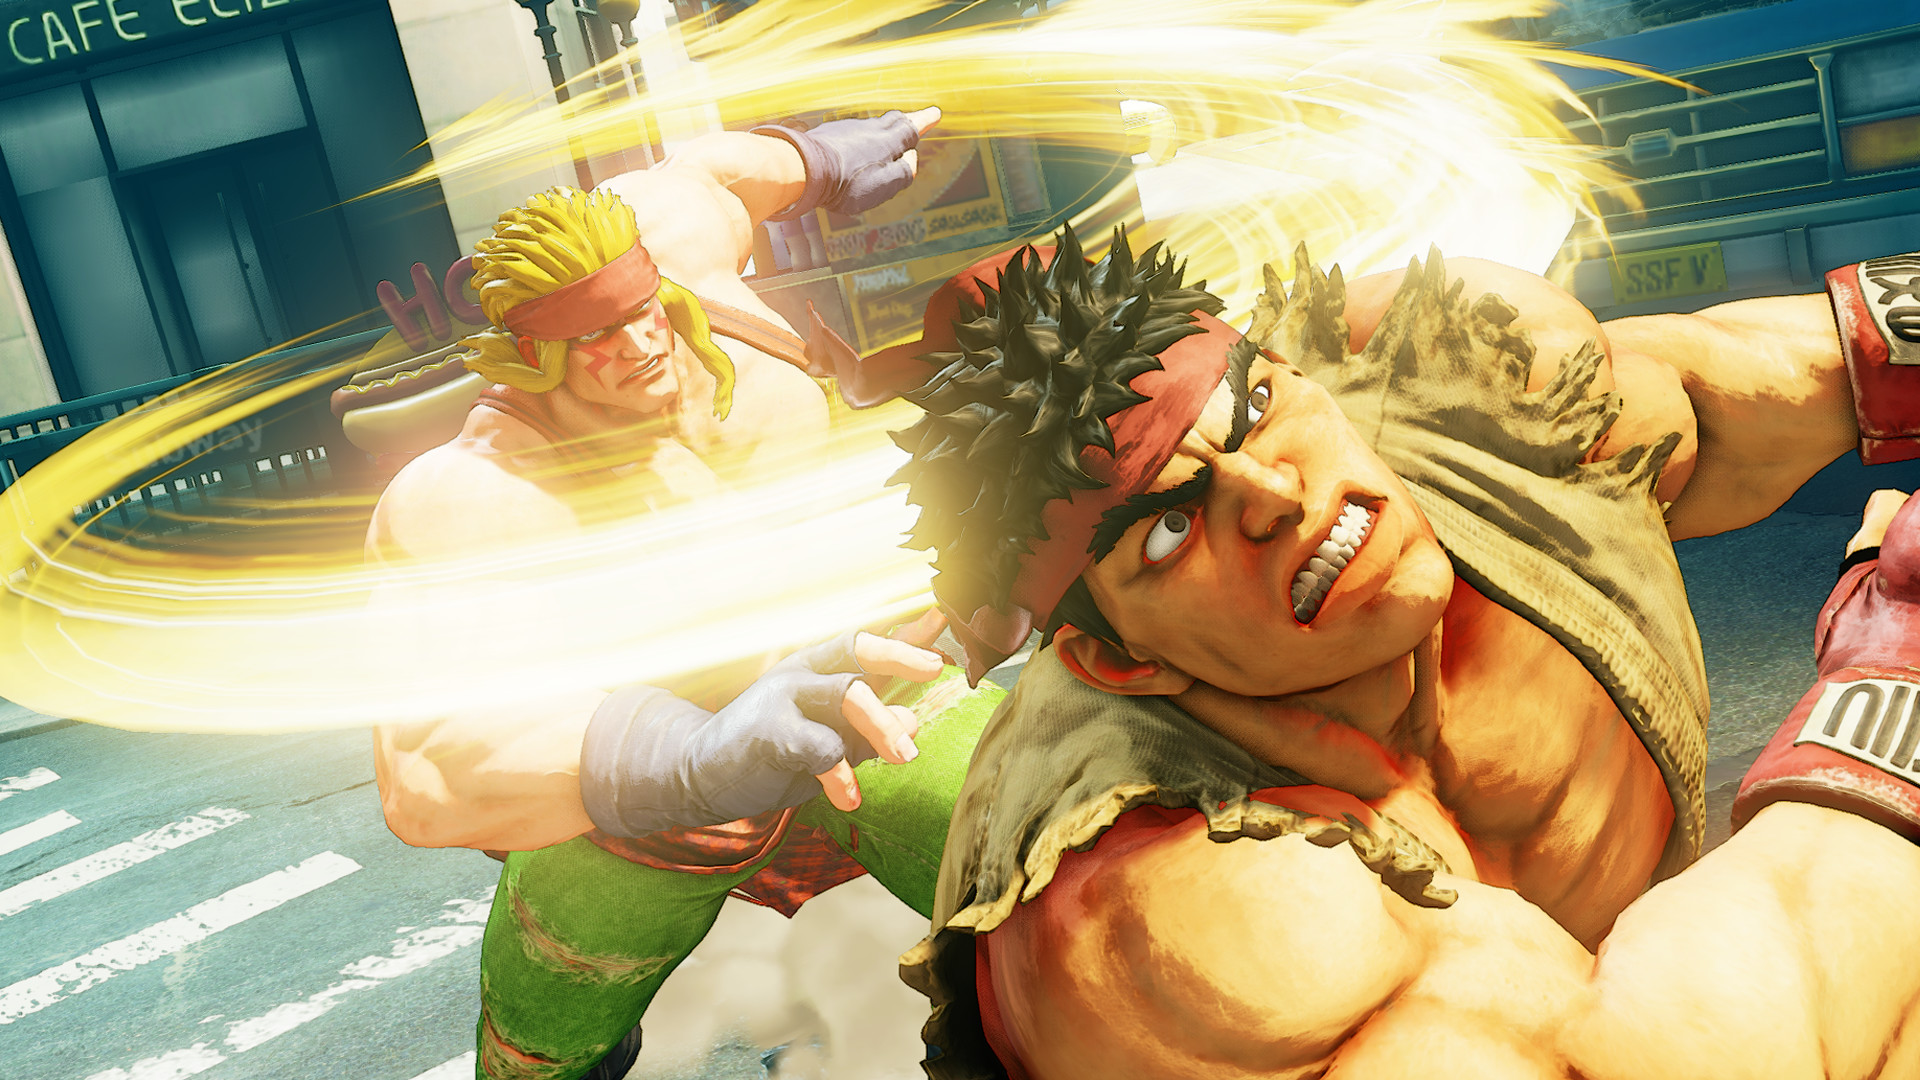 What Six Street Fighter 5 Characters Are Capcom Teasing? - GameSpot